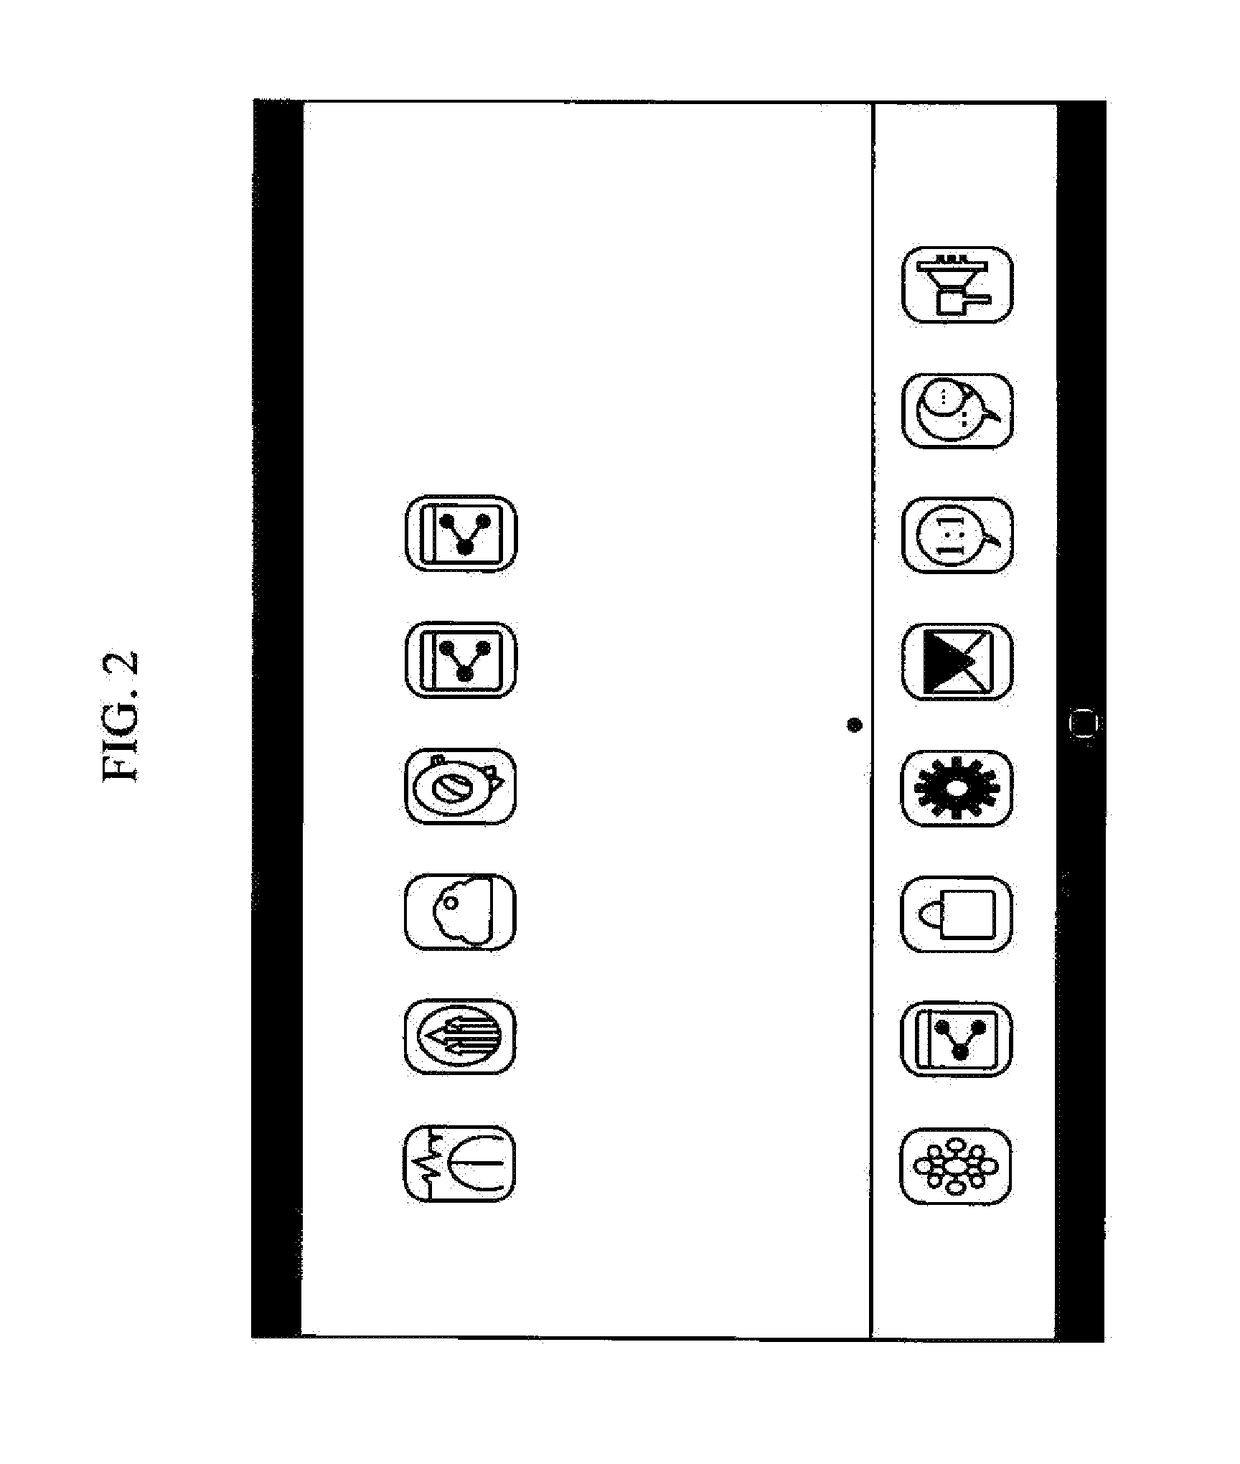 Apparatus for testing and developing products of network computing based on open-source virtualized cloud